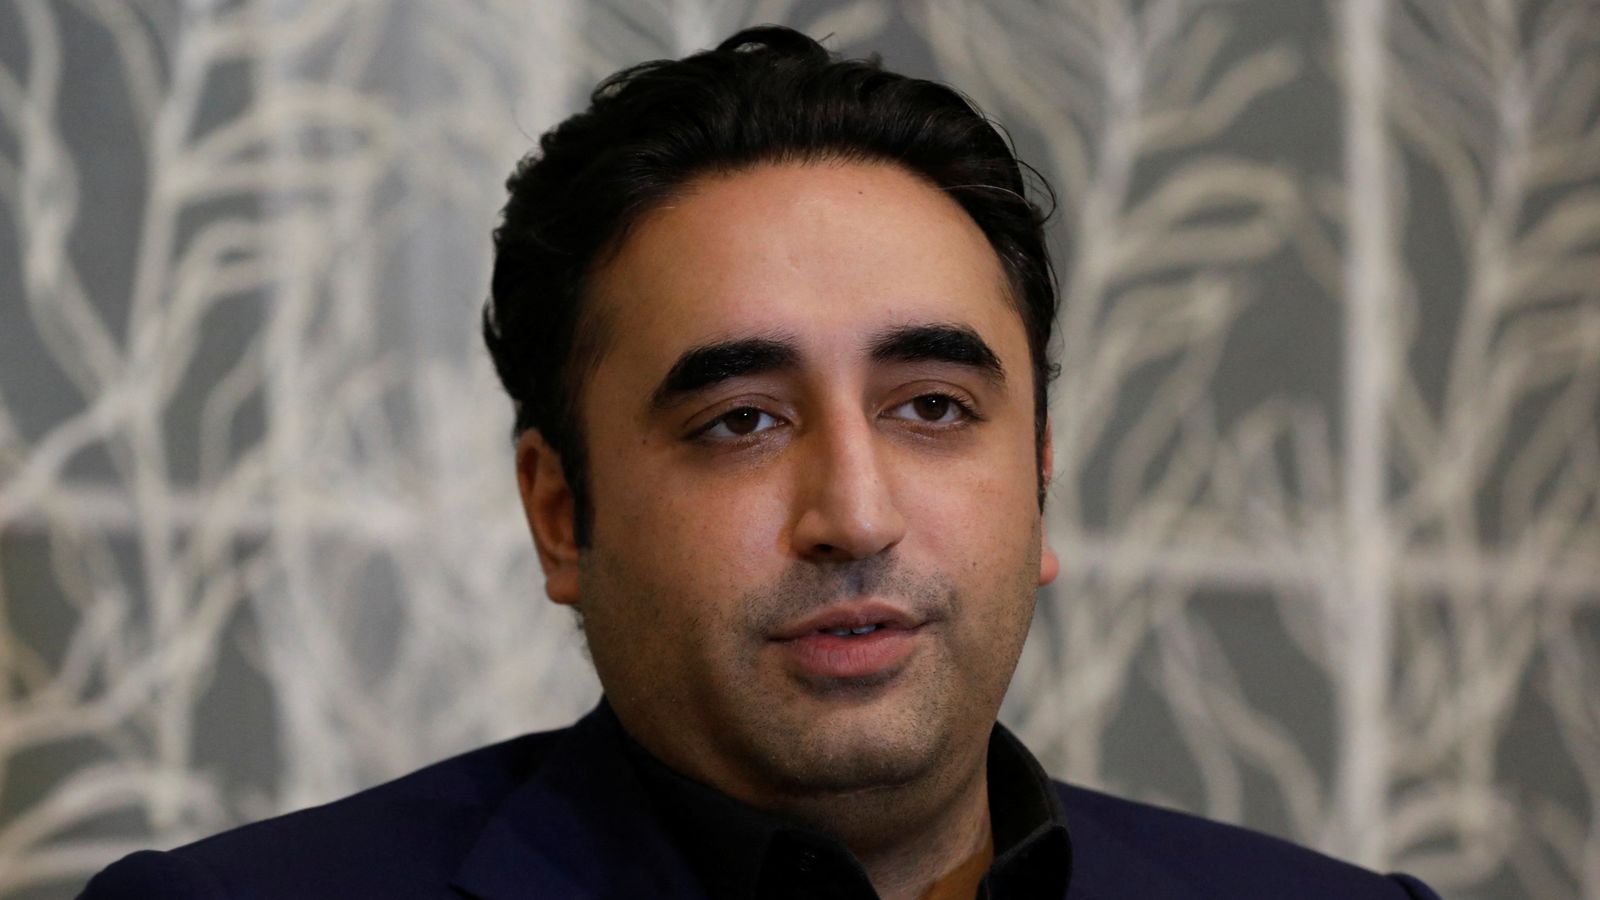 Bilawal Bhutto Zardari: The former prime minister's son hoping to lead Pakistan through a deeply turbulent time